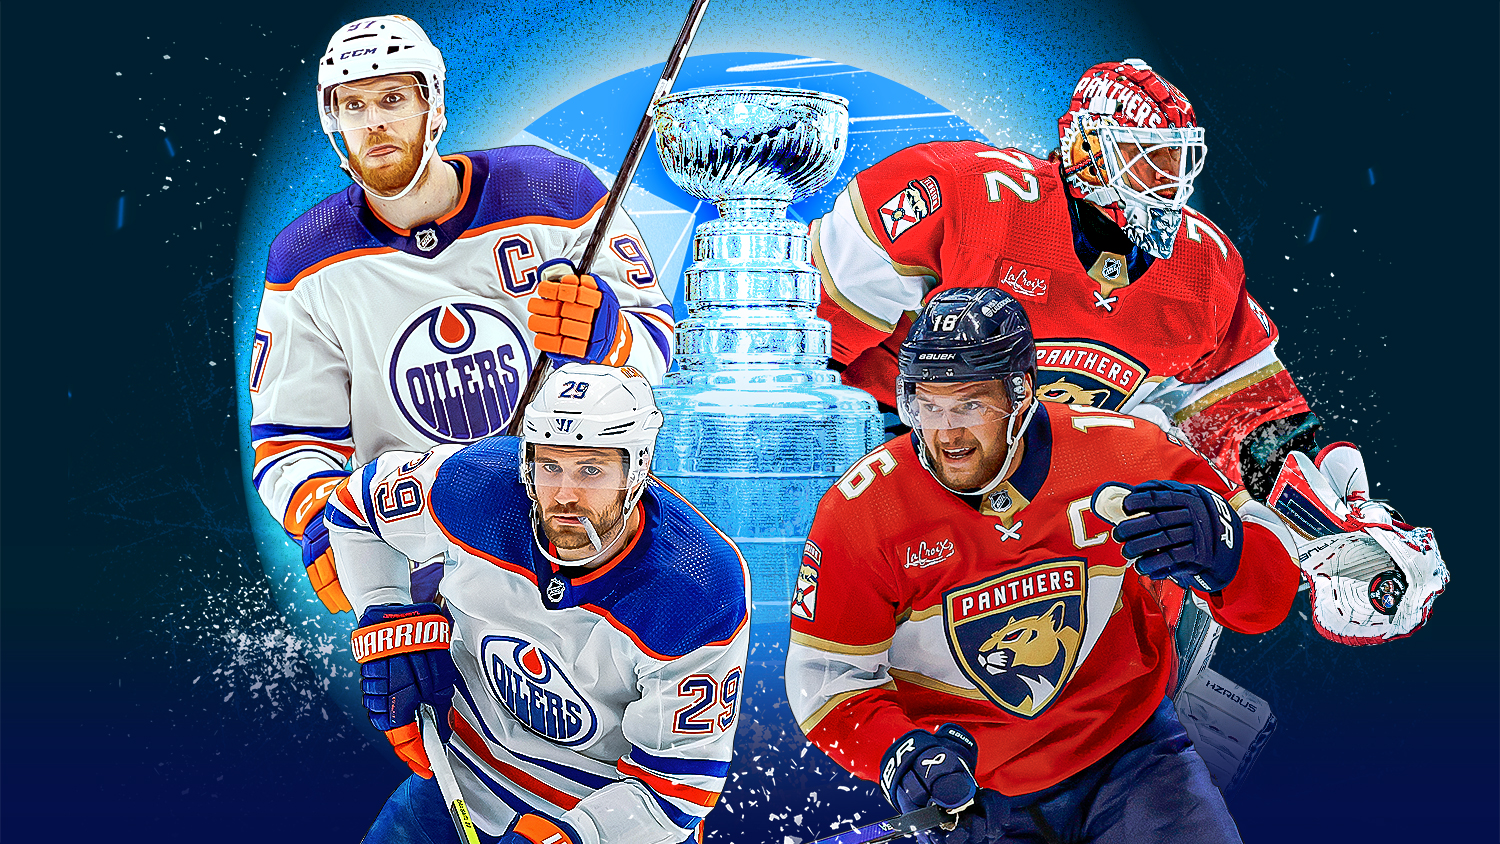 Nhl Stanley Cup Final Oilers Panthers 16x9 